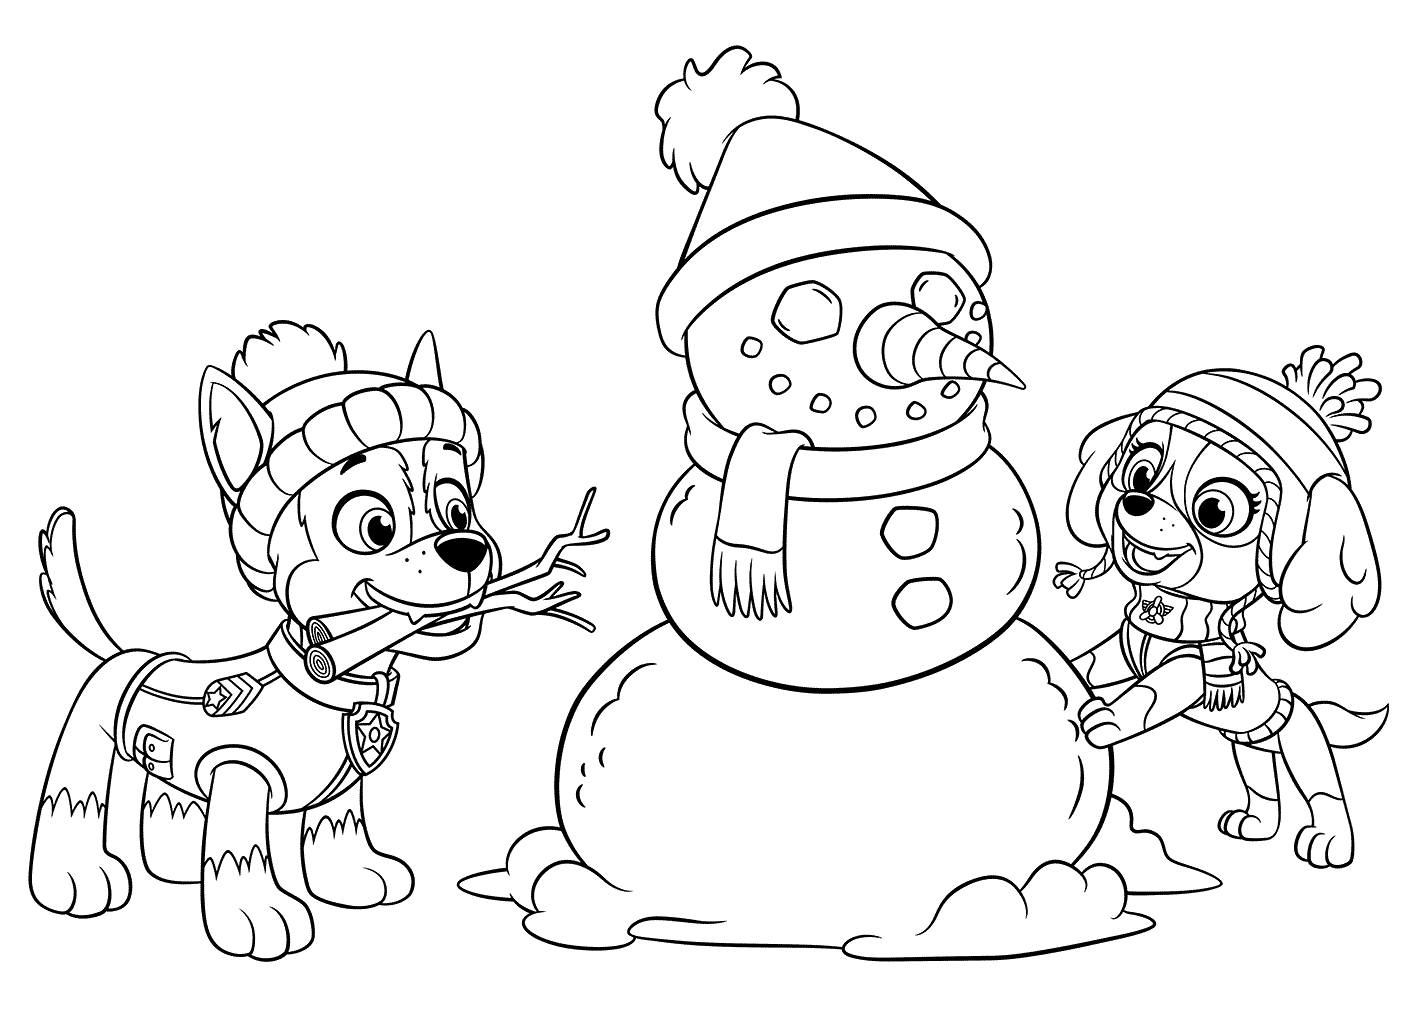 Holidays With The PAW Patrol Pups Coloring Page